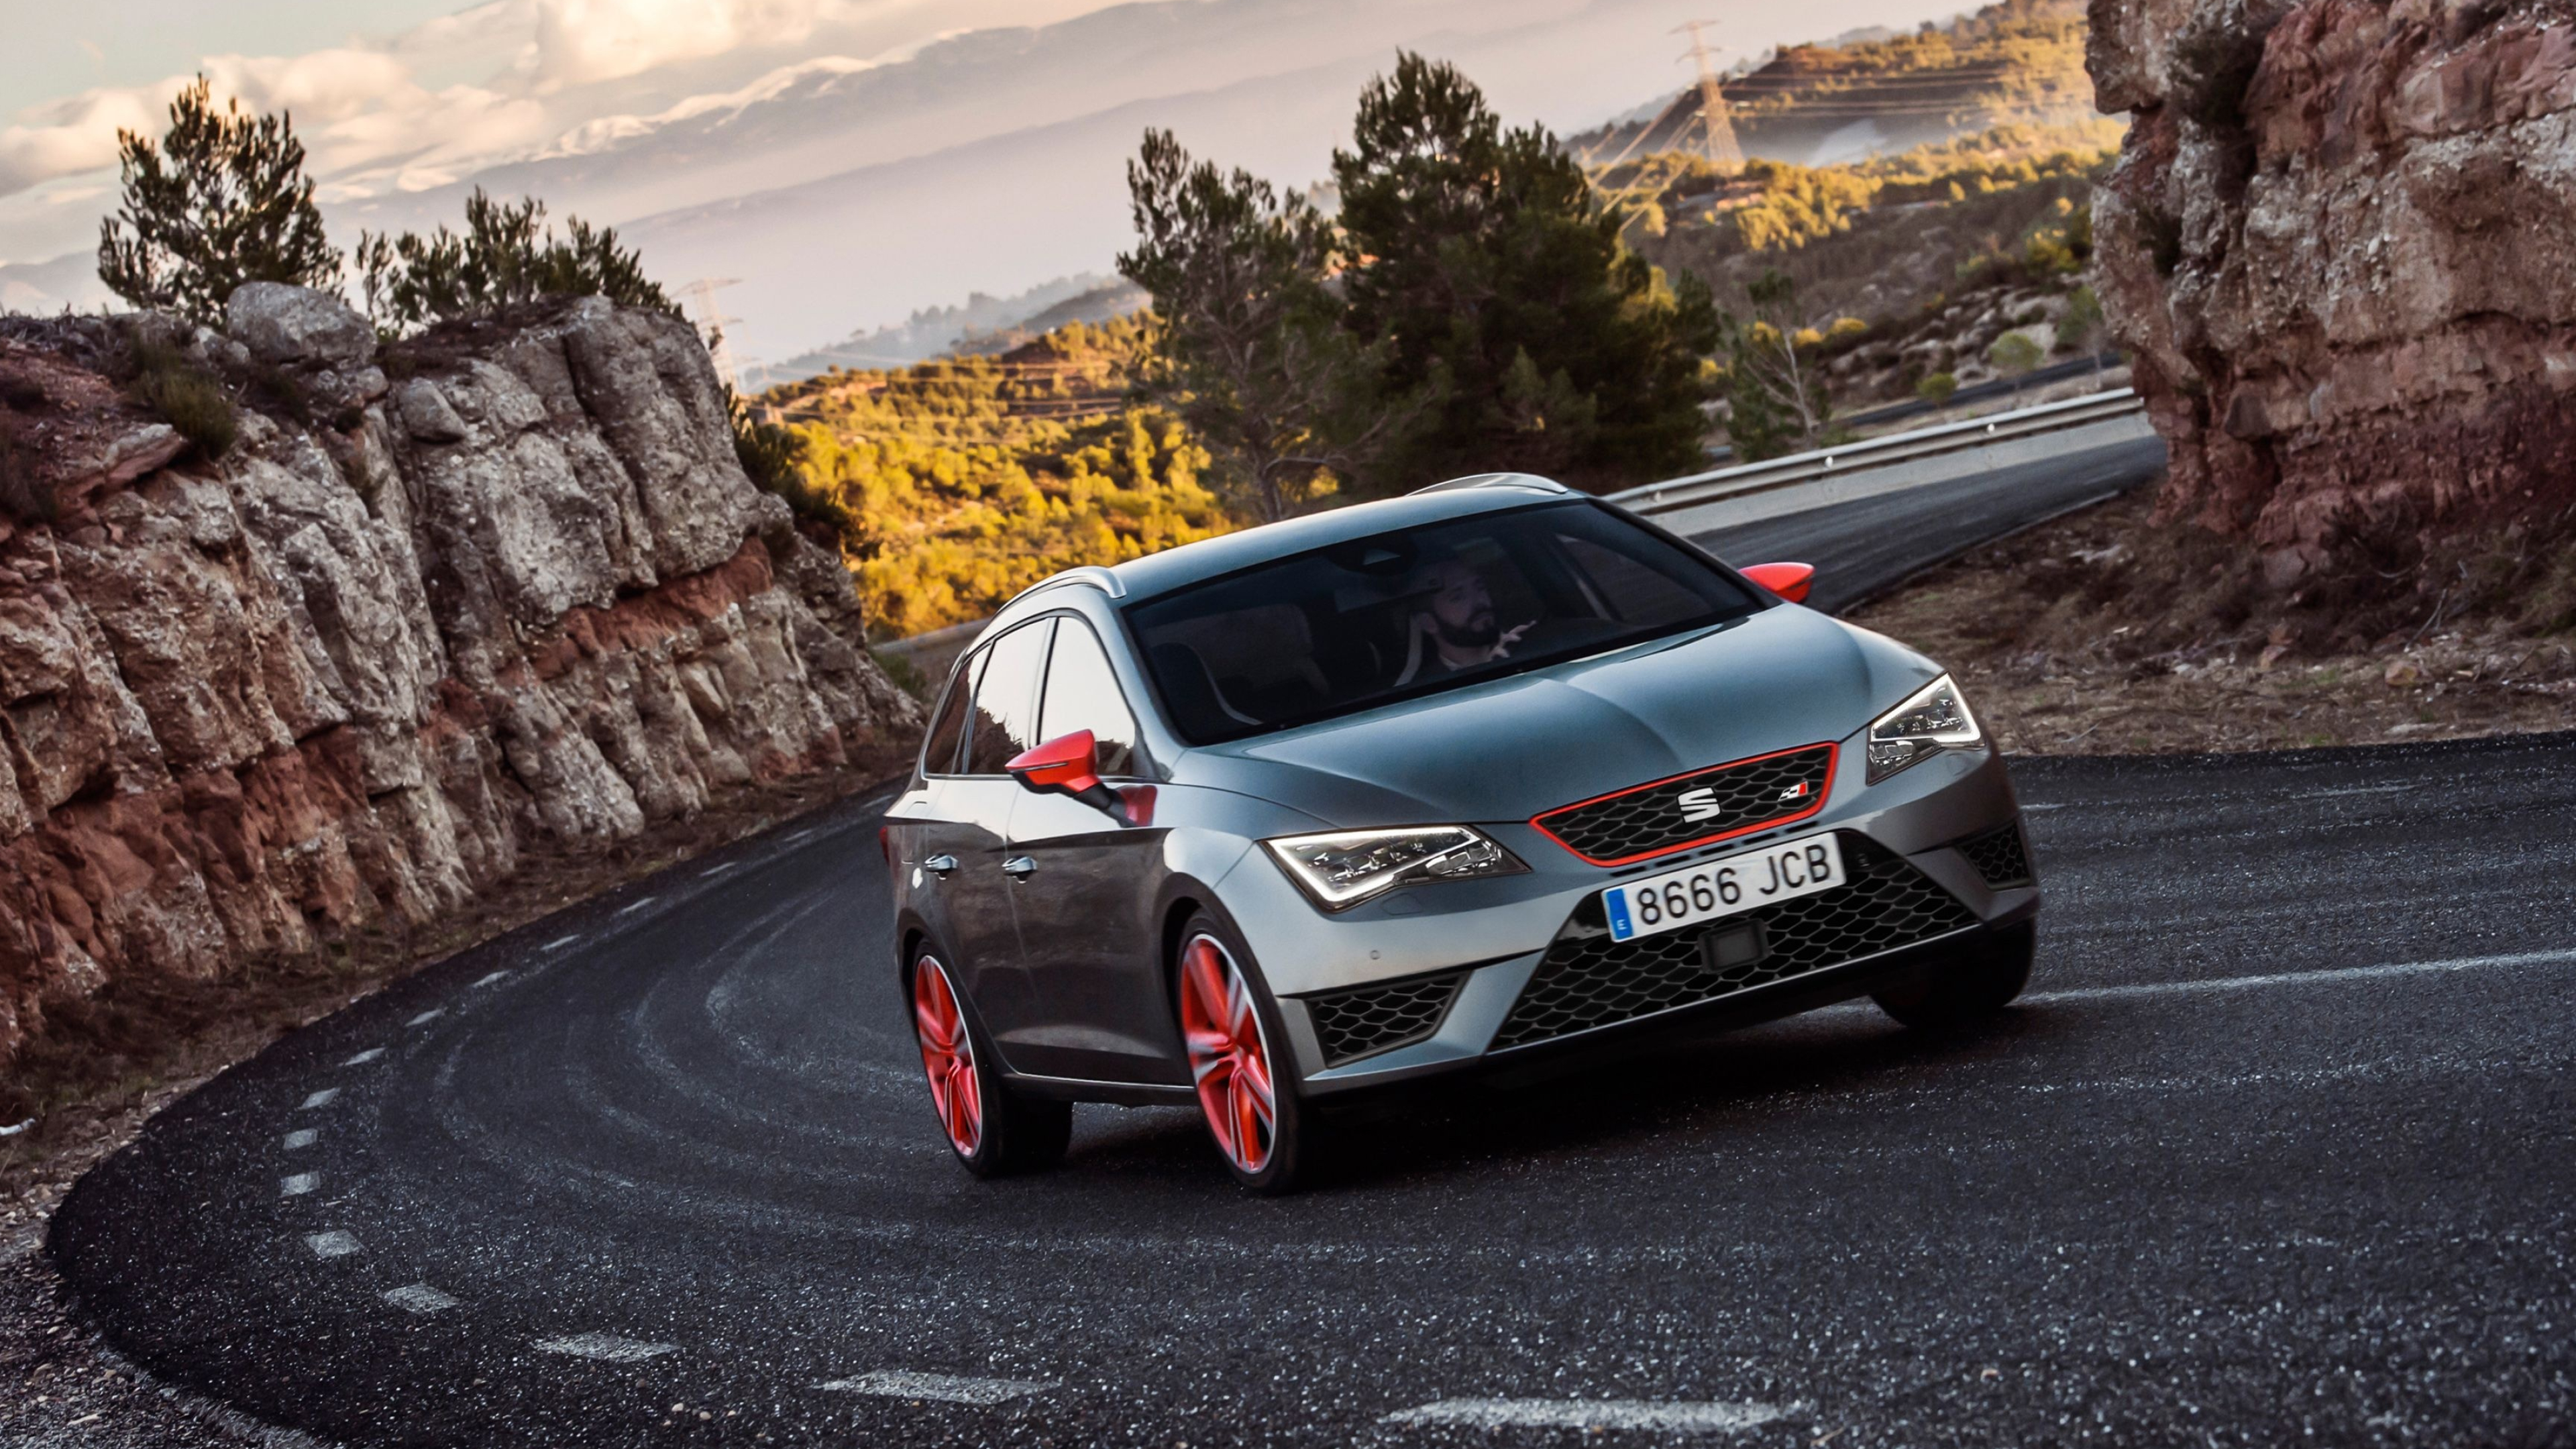 Seat Leon, Top-tier wallpapers, Stylish and dynamic, Unmatched performance, 3840x2160 4K Desktop